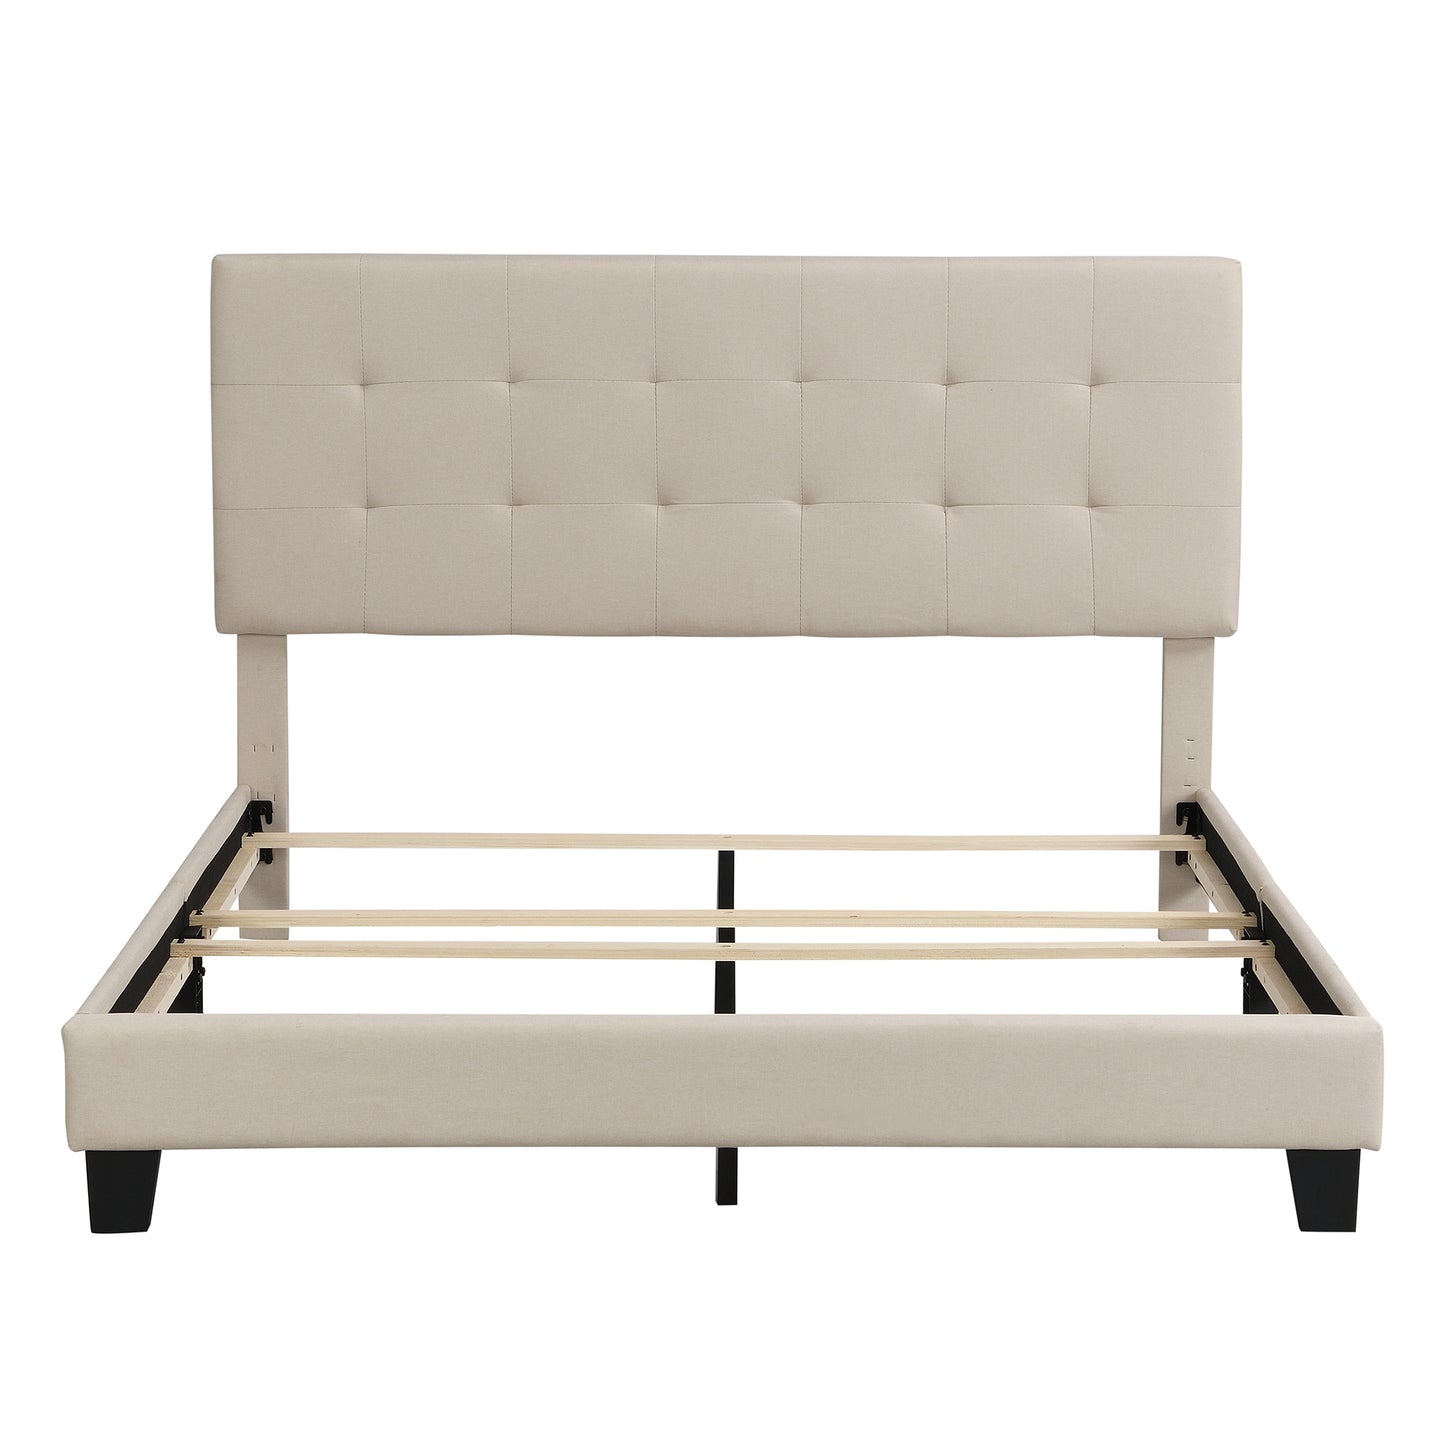 Upholstered Platform Bed with Tufted Headboard, Box Spring Needed, Beige Linen Fabric, Queen Size